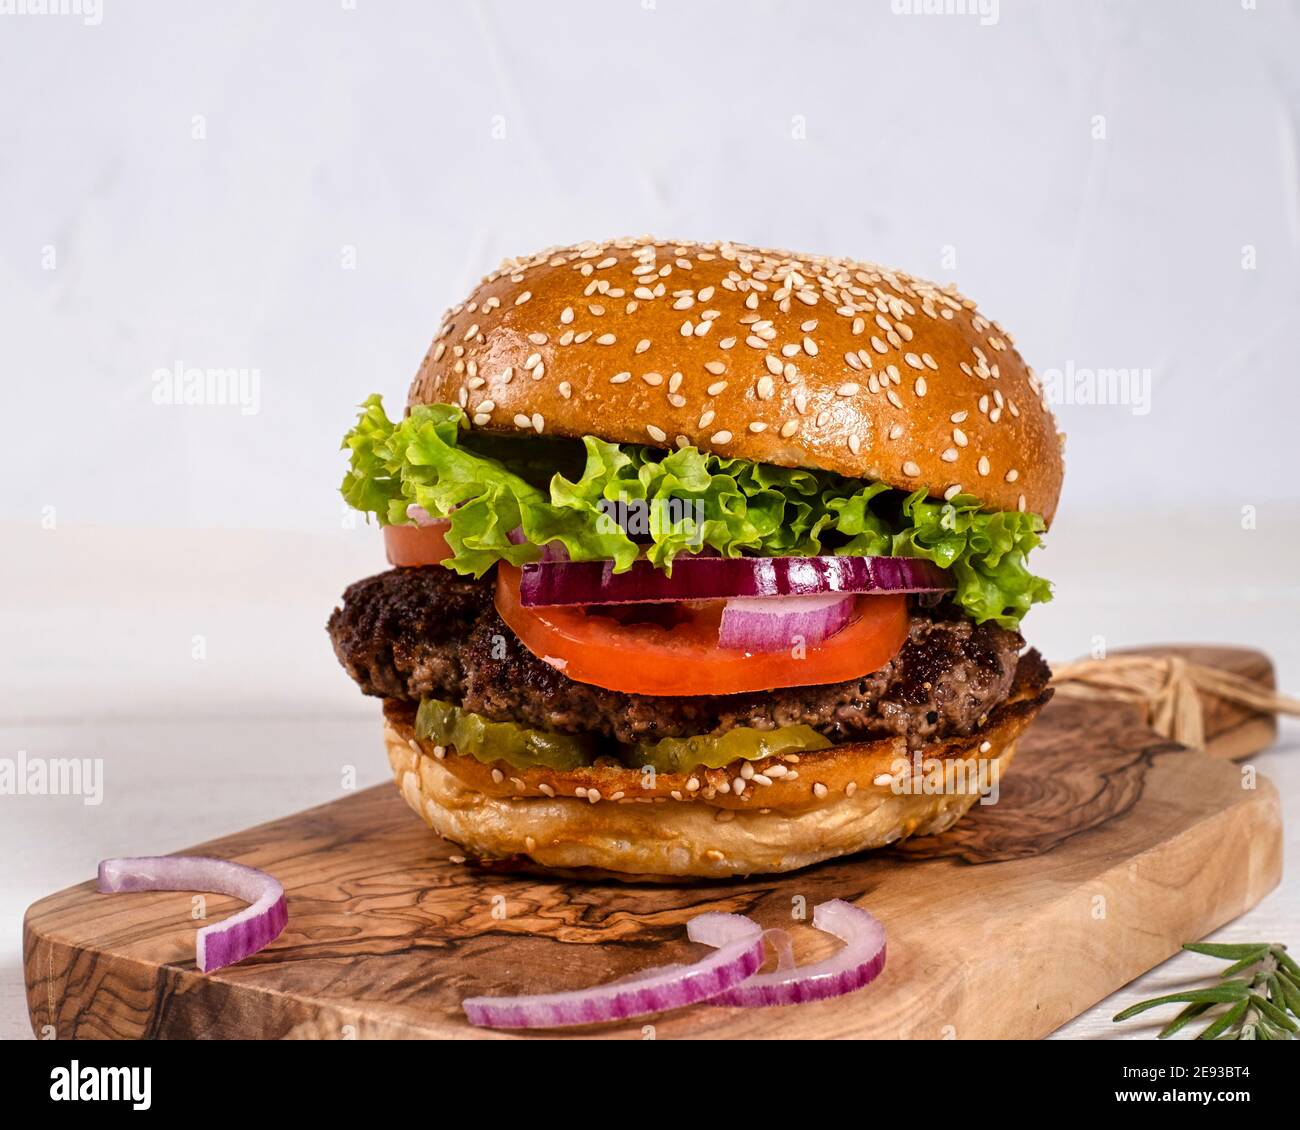 Juicy burger with beef, tomatoes, cucumbers and onions nicely arranged on a wooden board on a white background Stock Photo